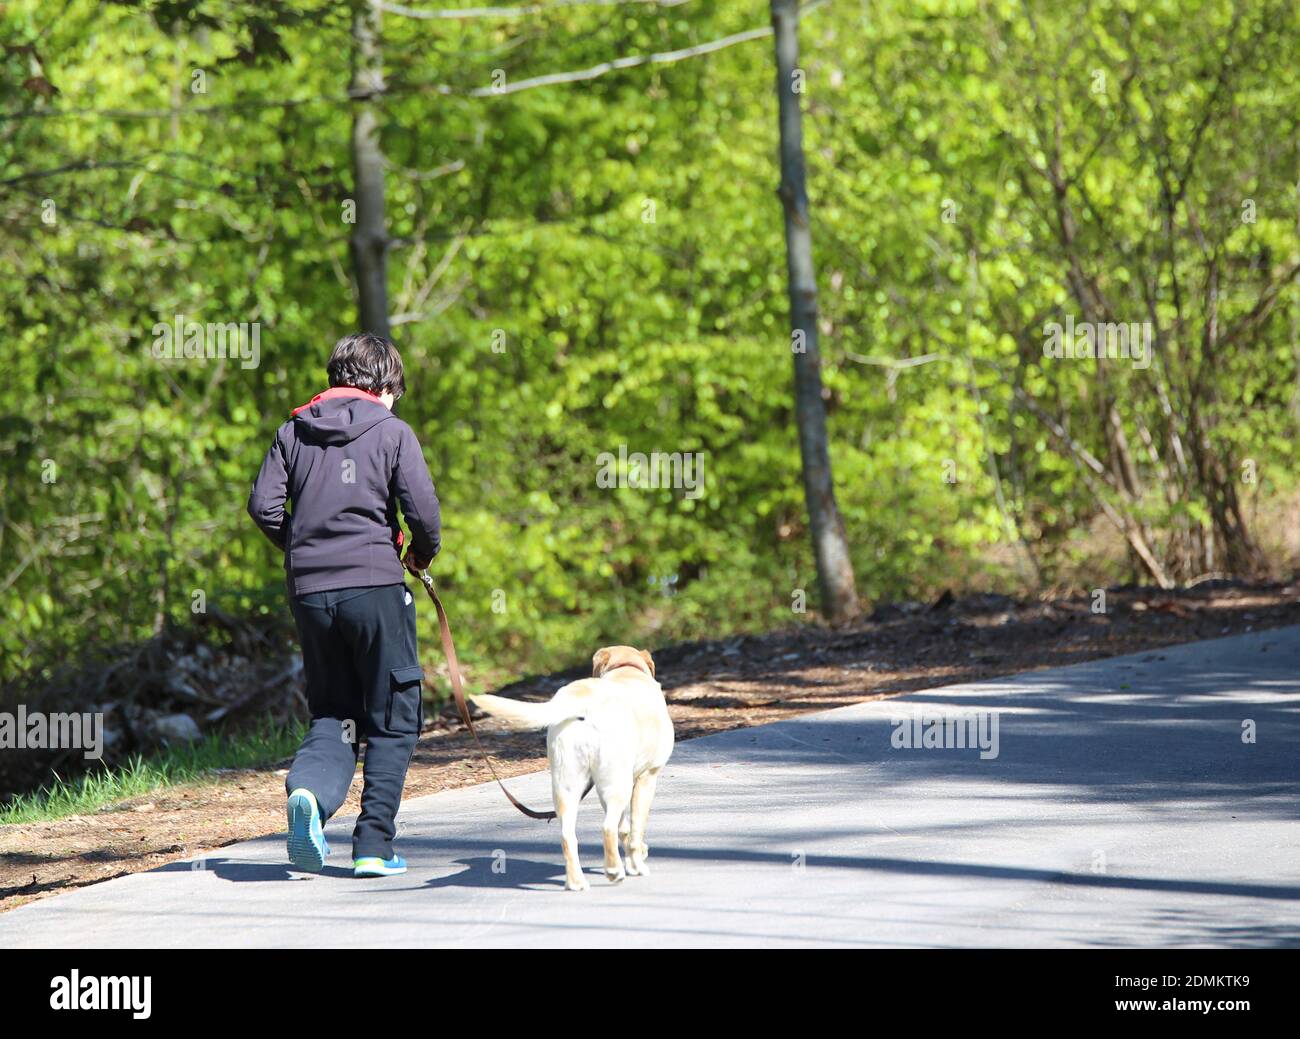 Boy With Dog Walking On Road Against Trees Stock Photo